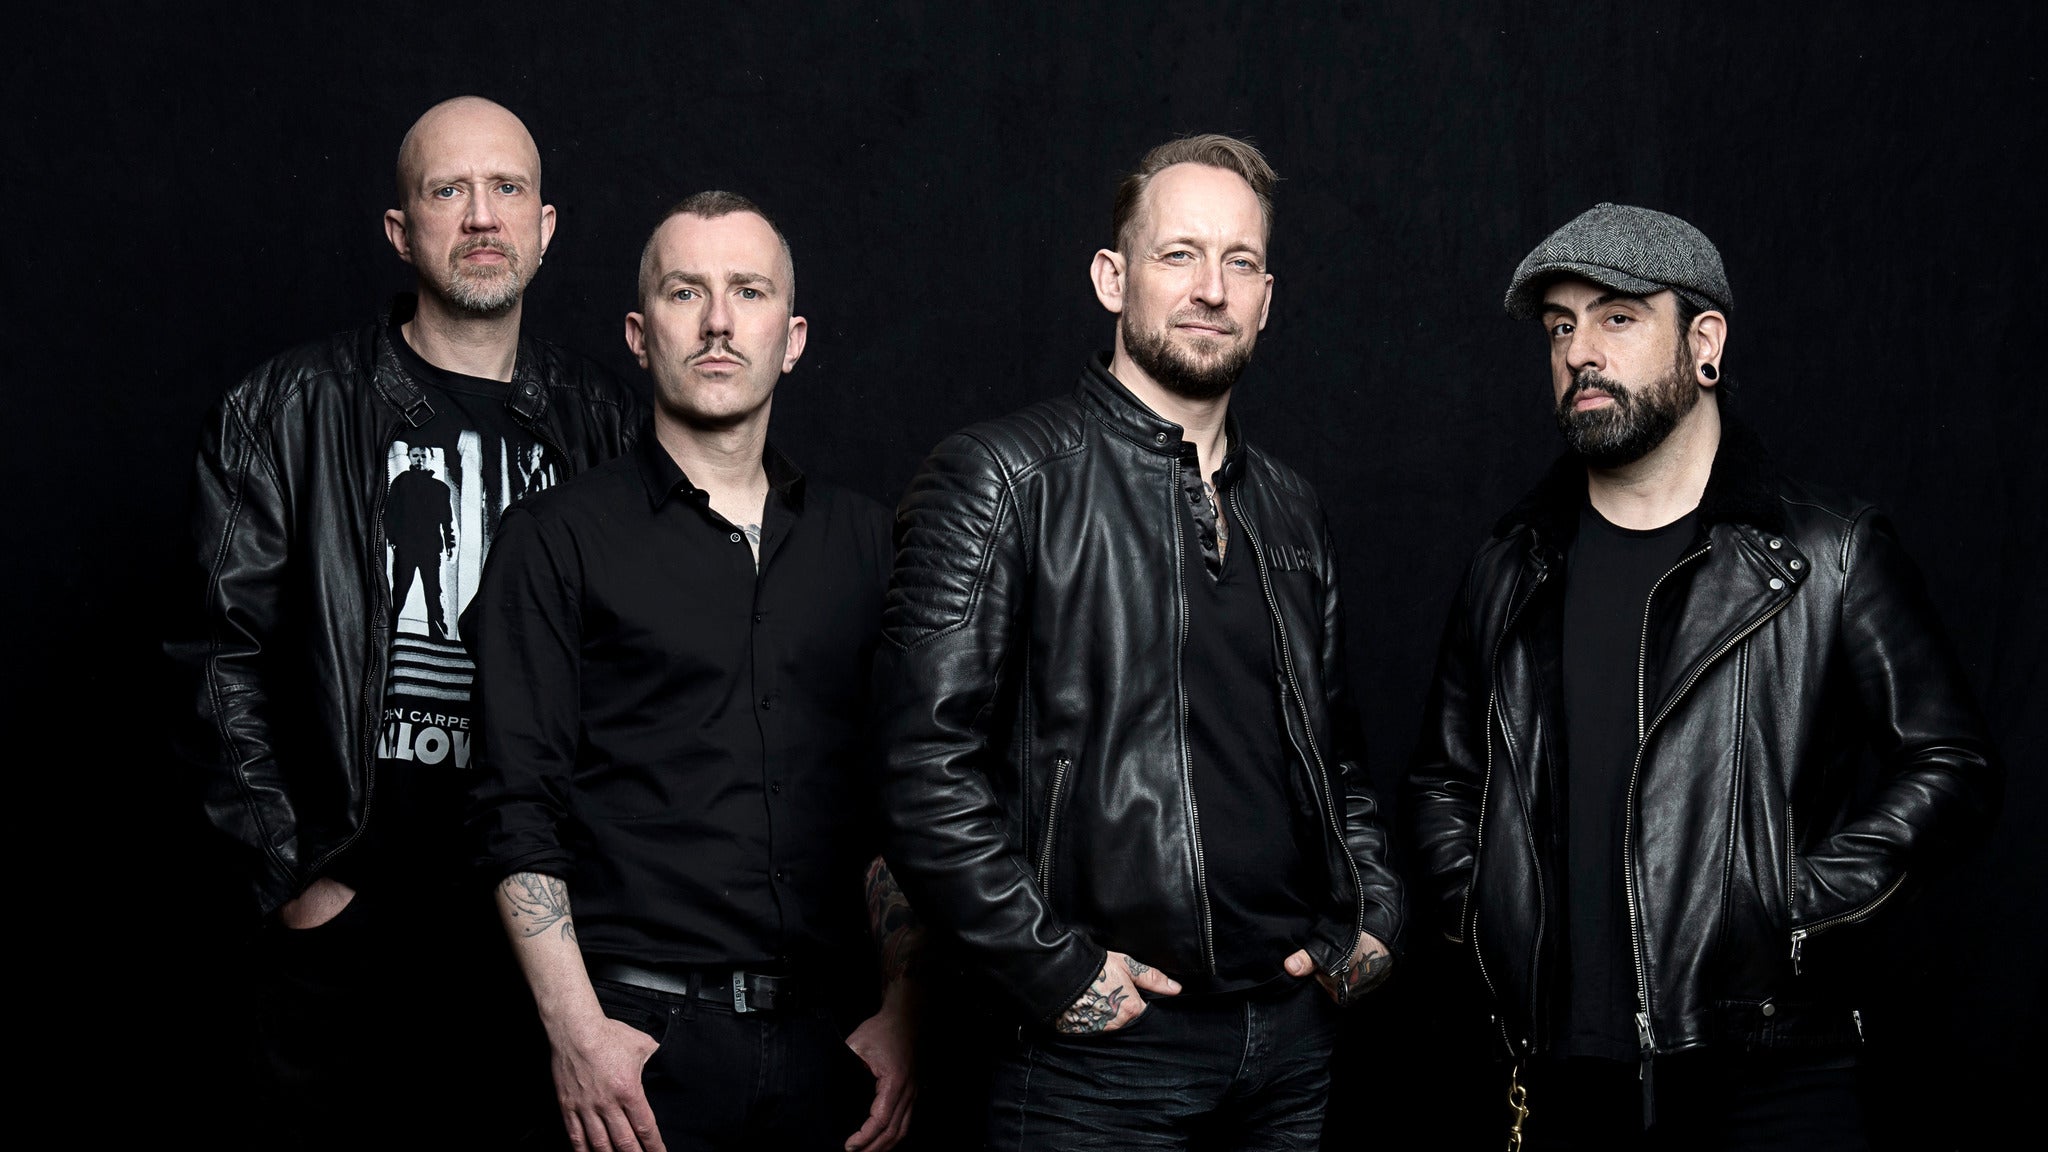 Image used with permission from Ticketmaster | Volbeat tickets